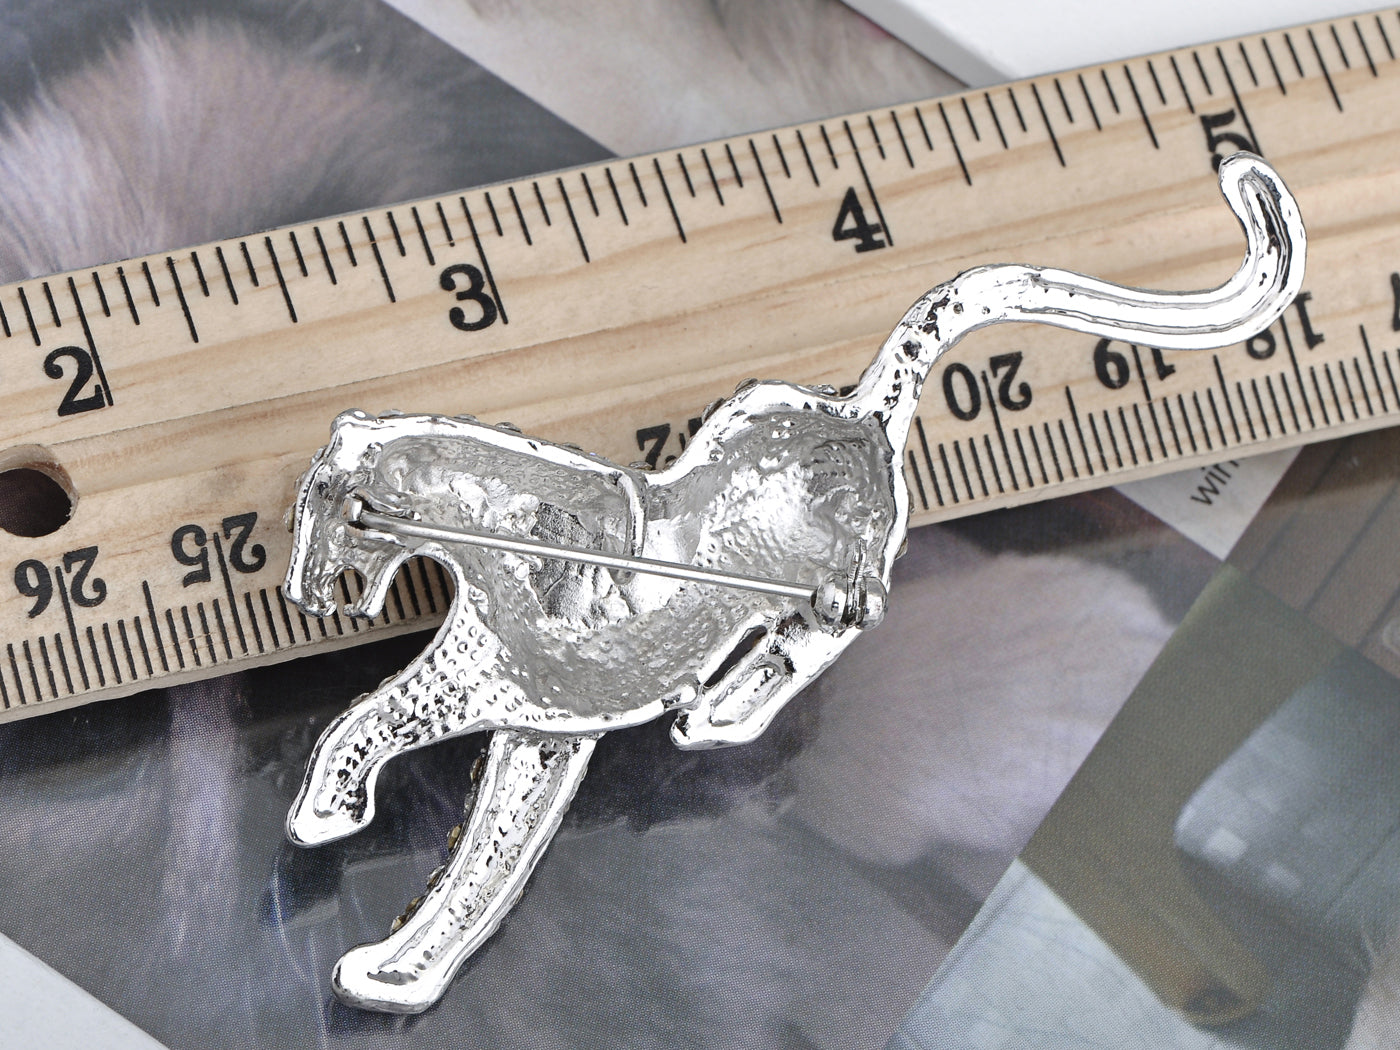 Silver Panther Leopard Lapel Brooch Pin